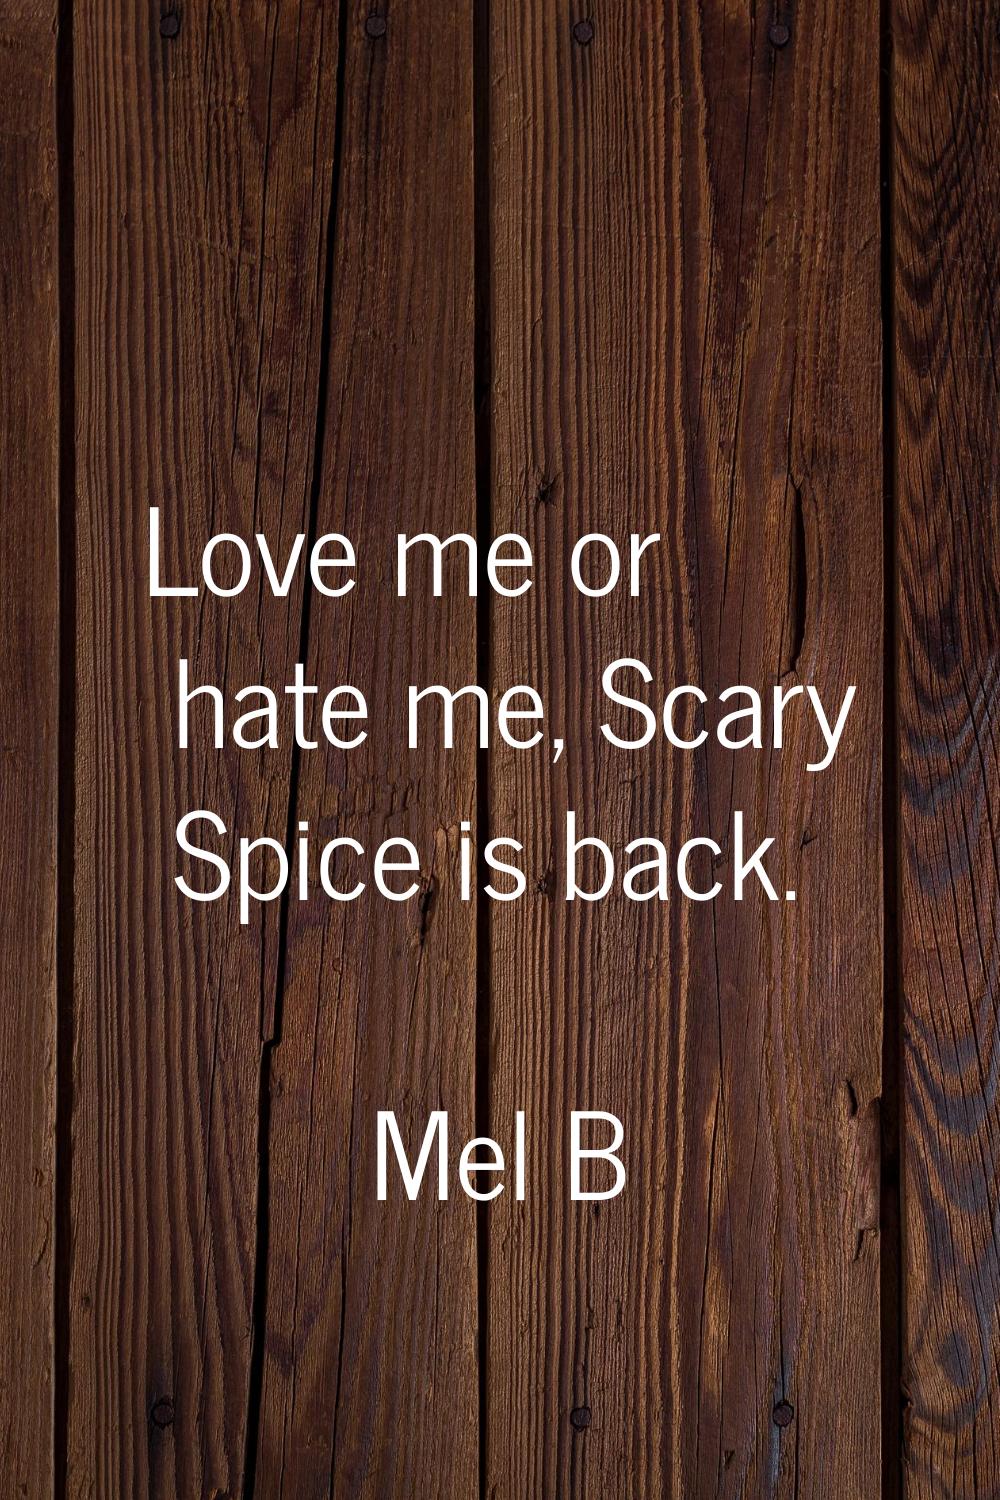 Love me or hate me, Scary Spice is back.